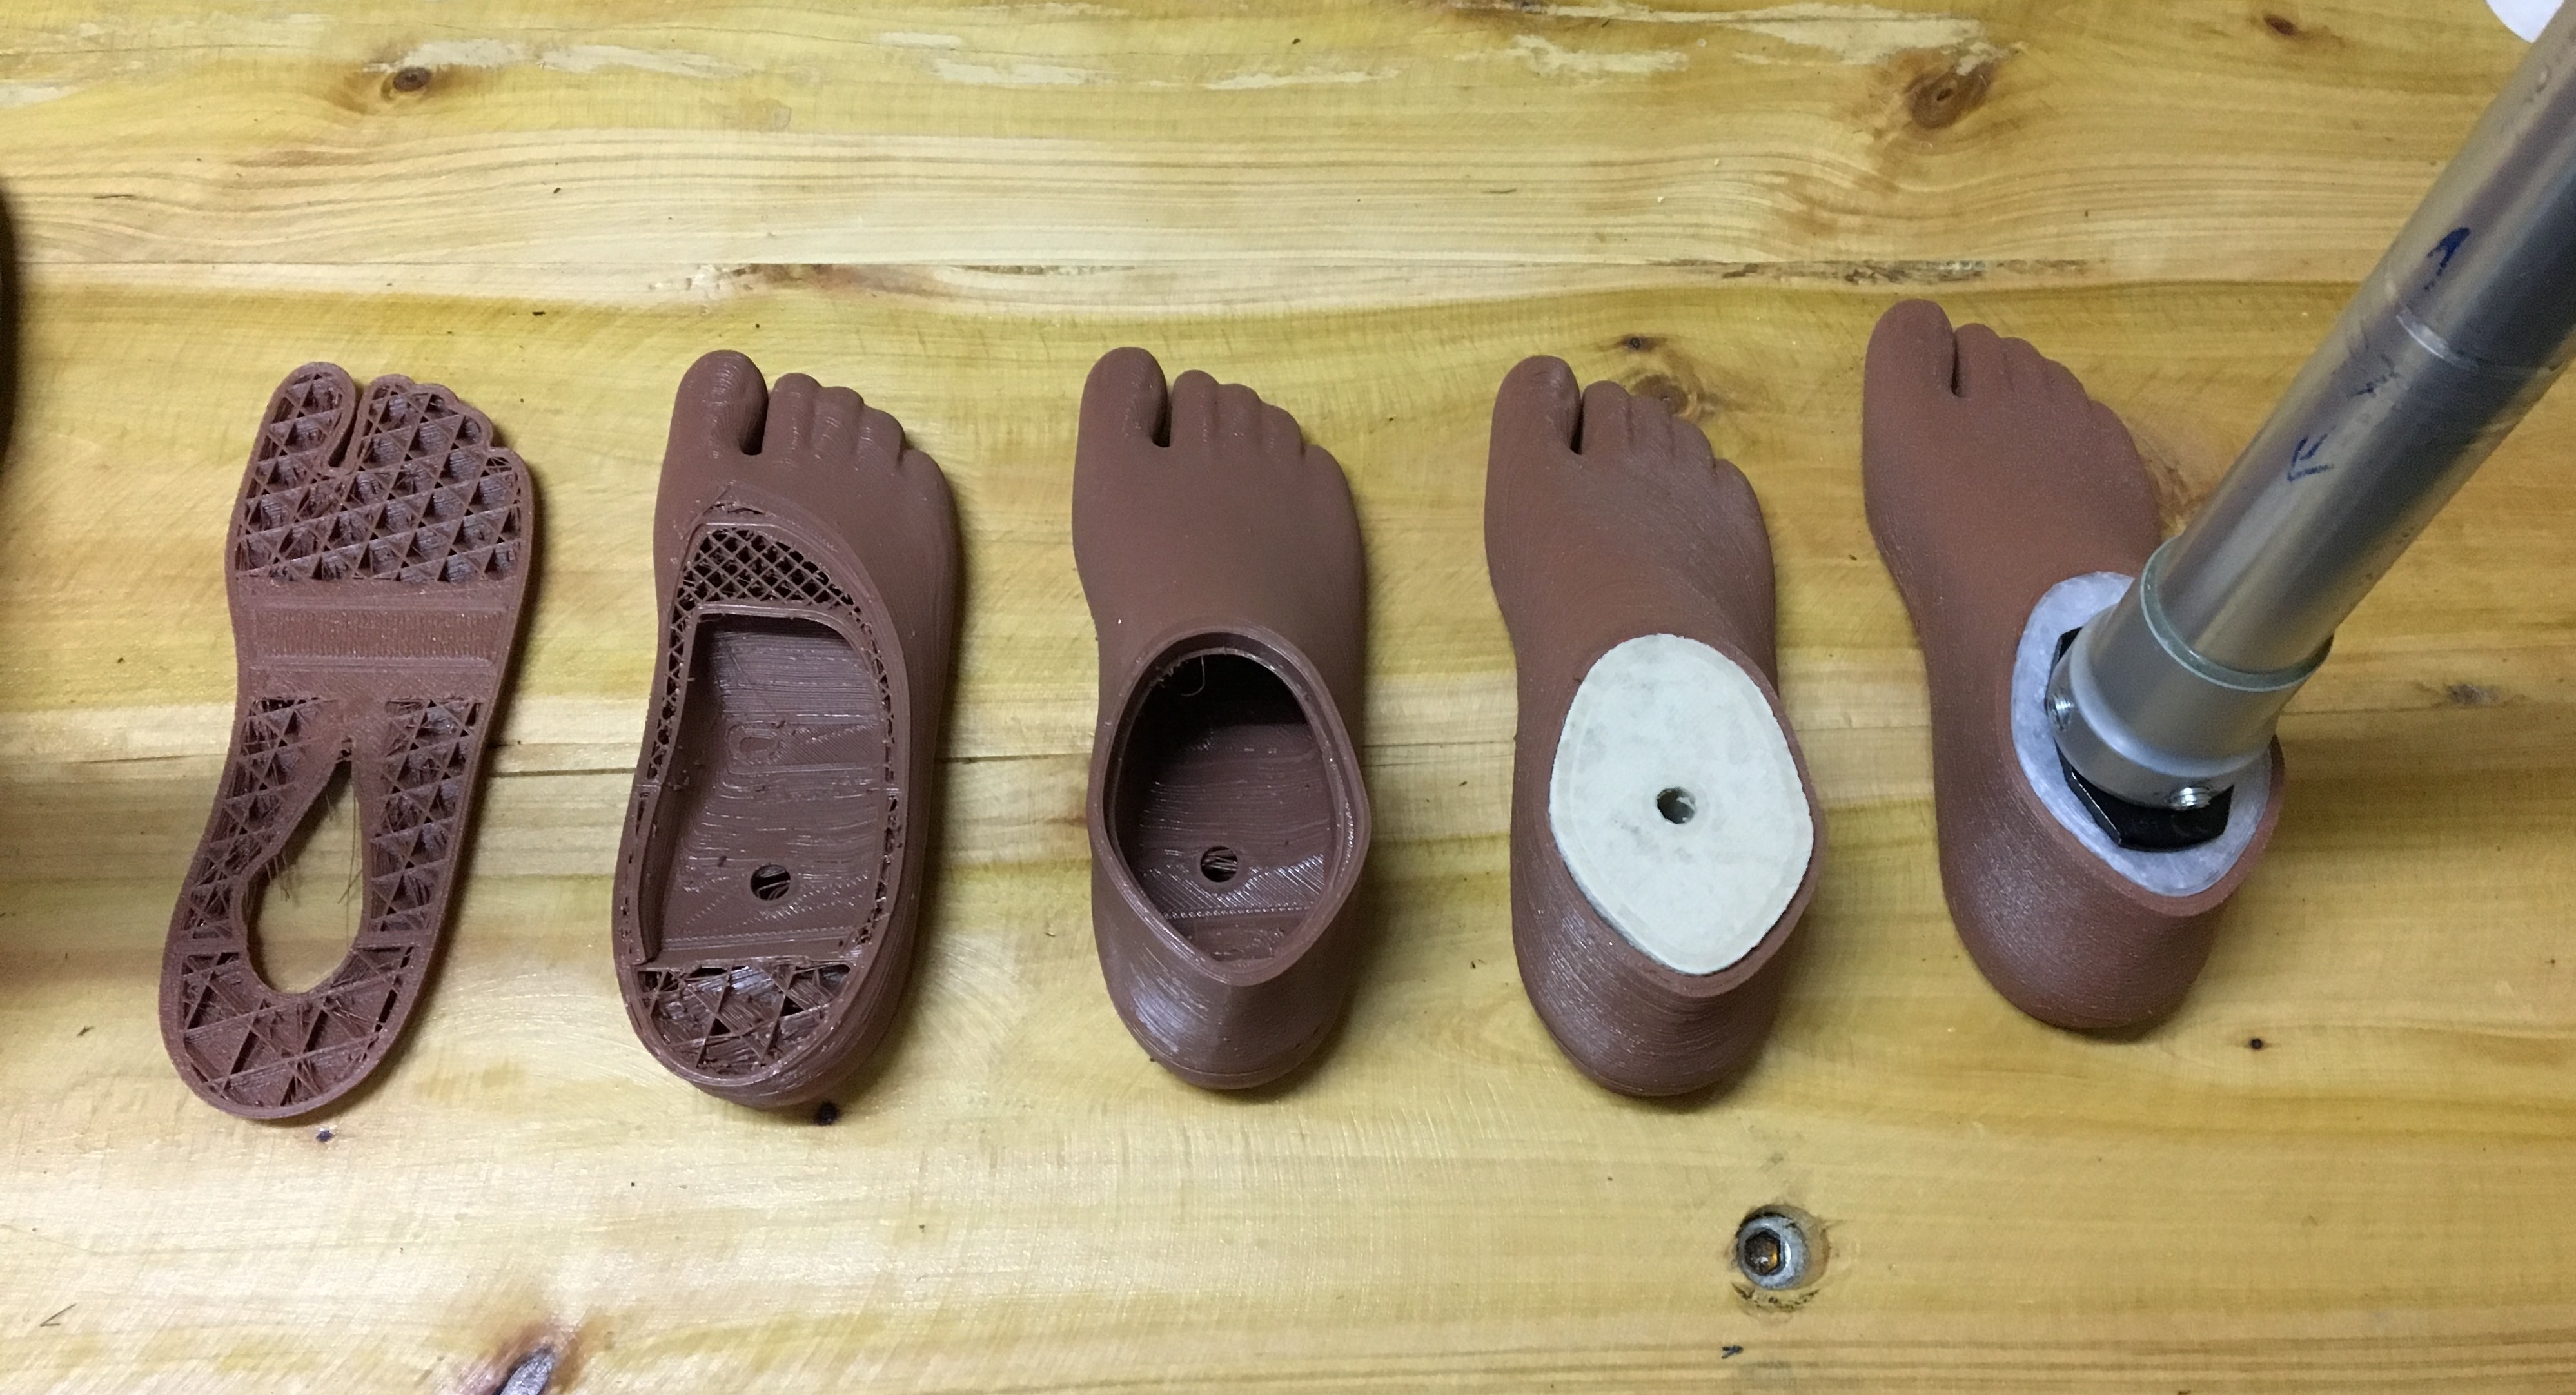 A step-by-step look at the prosthetic foot design.  5 stages of the 3D printed foot are lined next to each other.